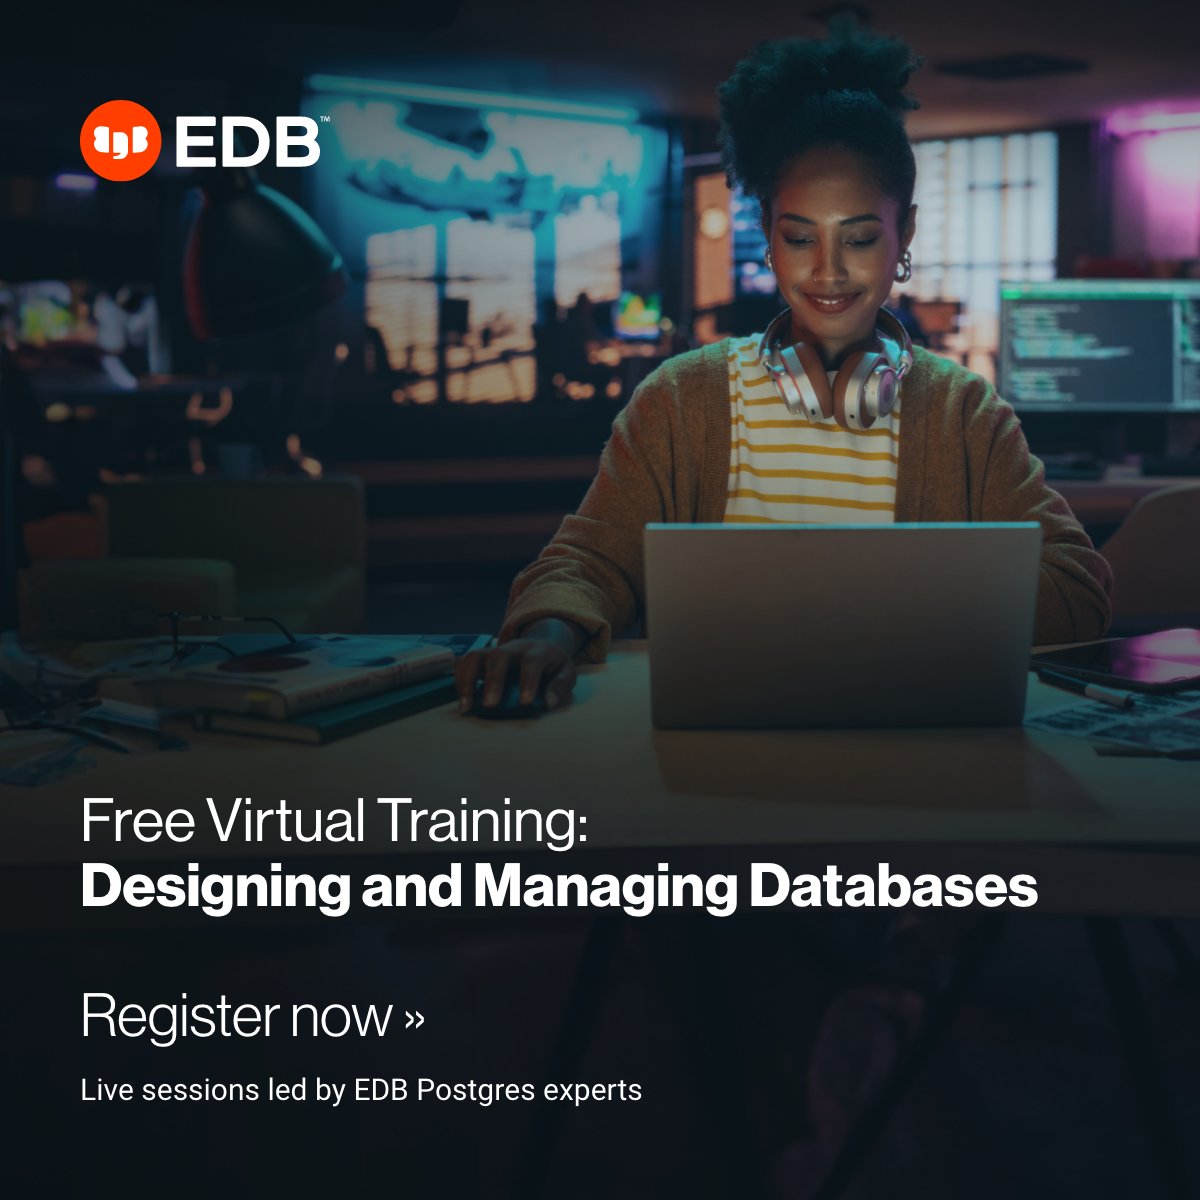 At EDB, we empower our community with free training to master Postgres and unleash its potential. Join our Postgres experts in a virtual training session on Designing and Managing Databases. Register for live sessions happening throughout May. Enroll now: bit.ly/3TOO19v